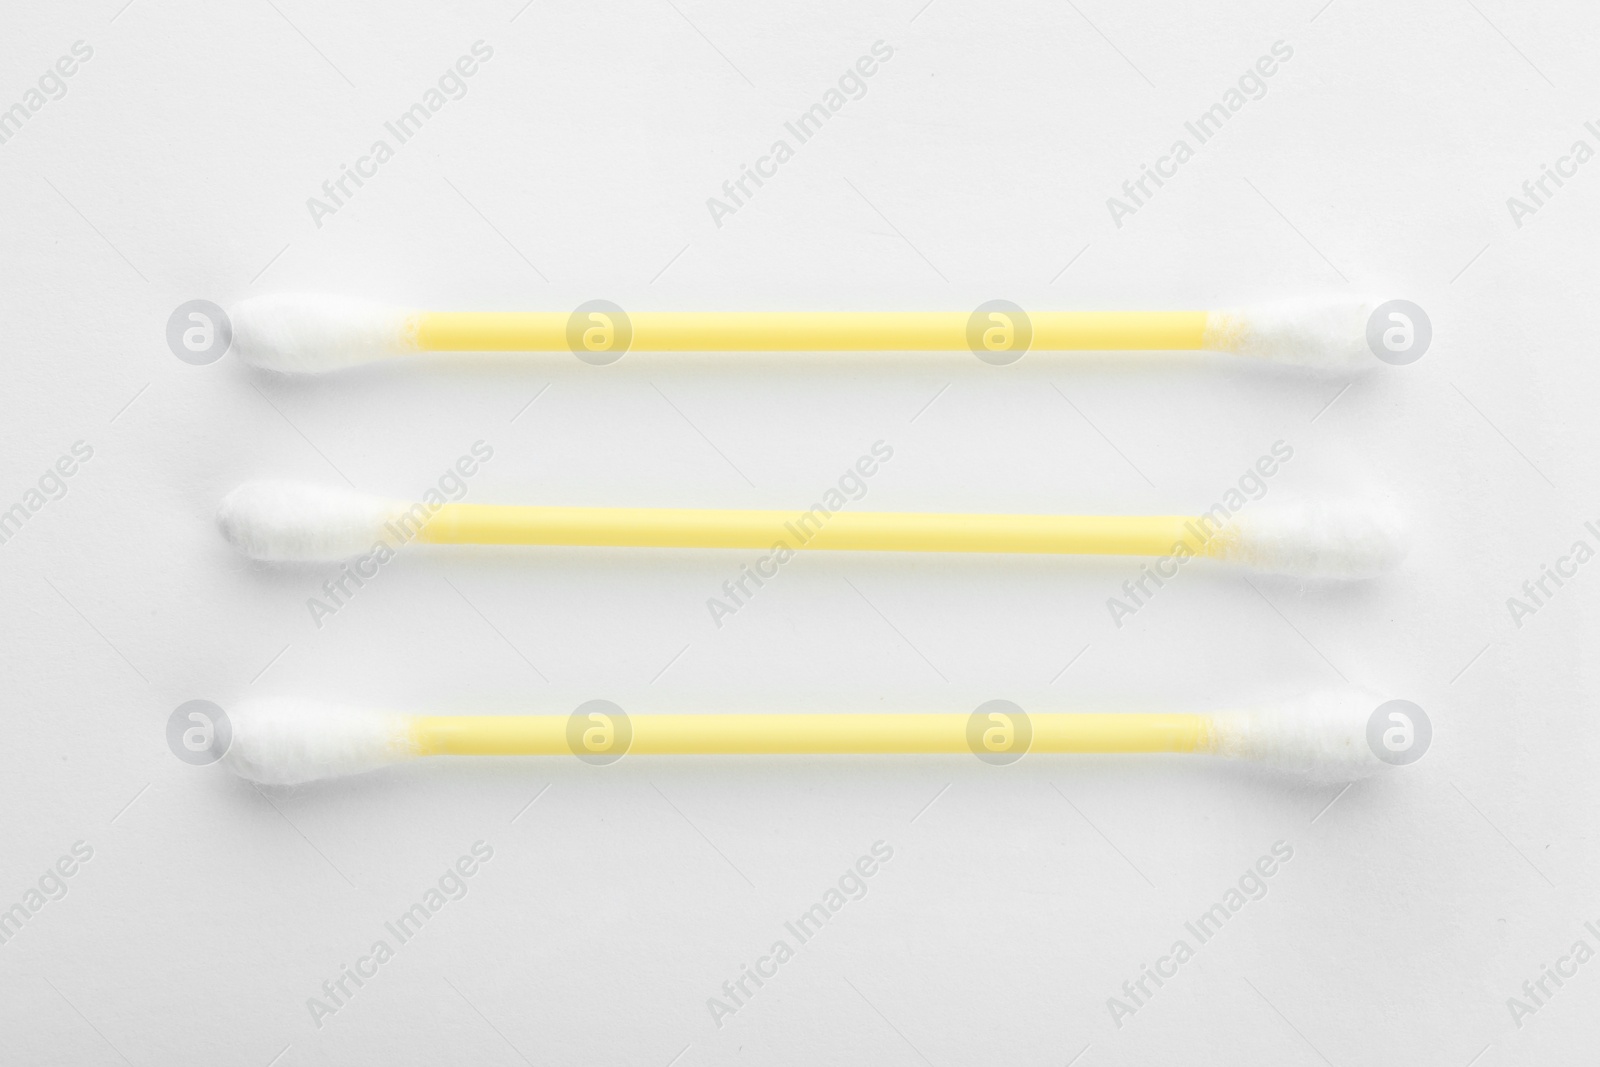 Photo of Yellow plastic cotton swabs on white background, top view